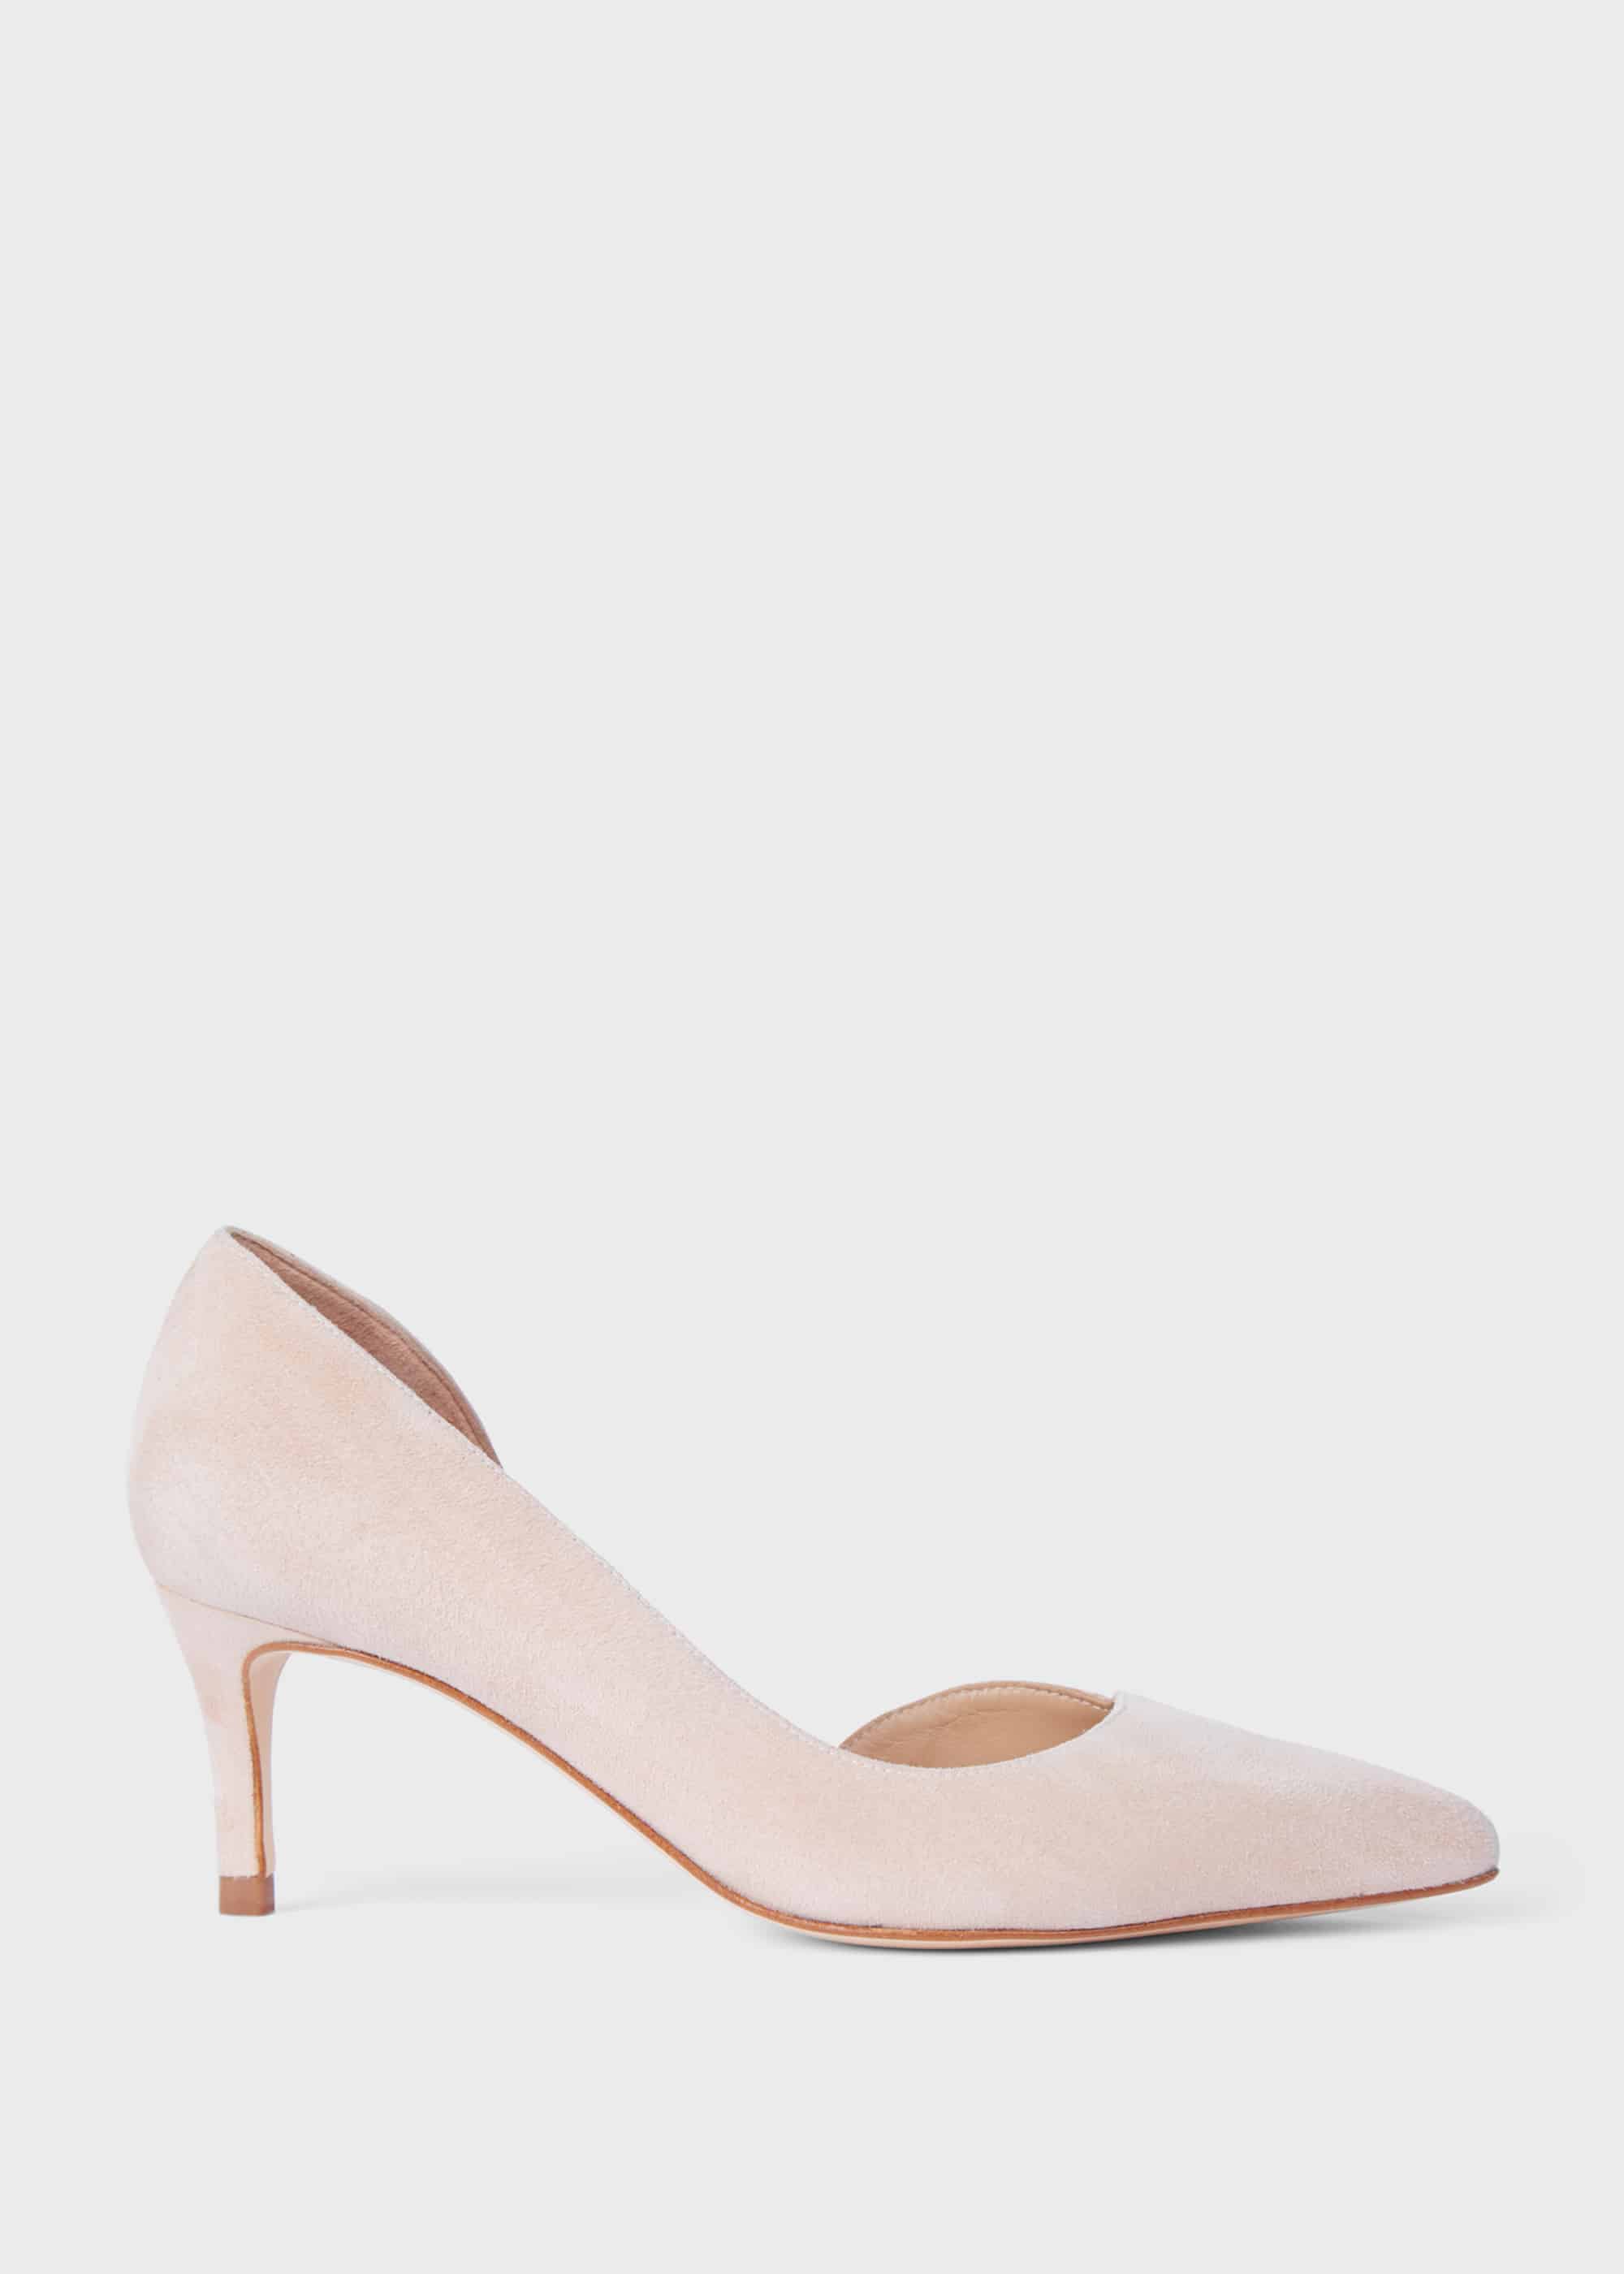 Hobbs Women's Selena Suede D'Orsay Court Shoes - Blush